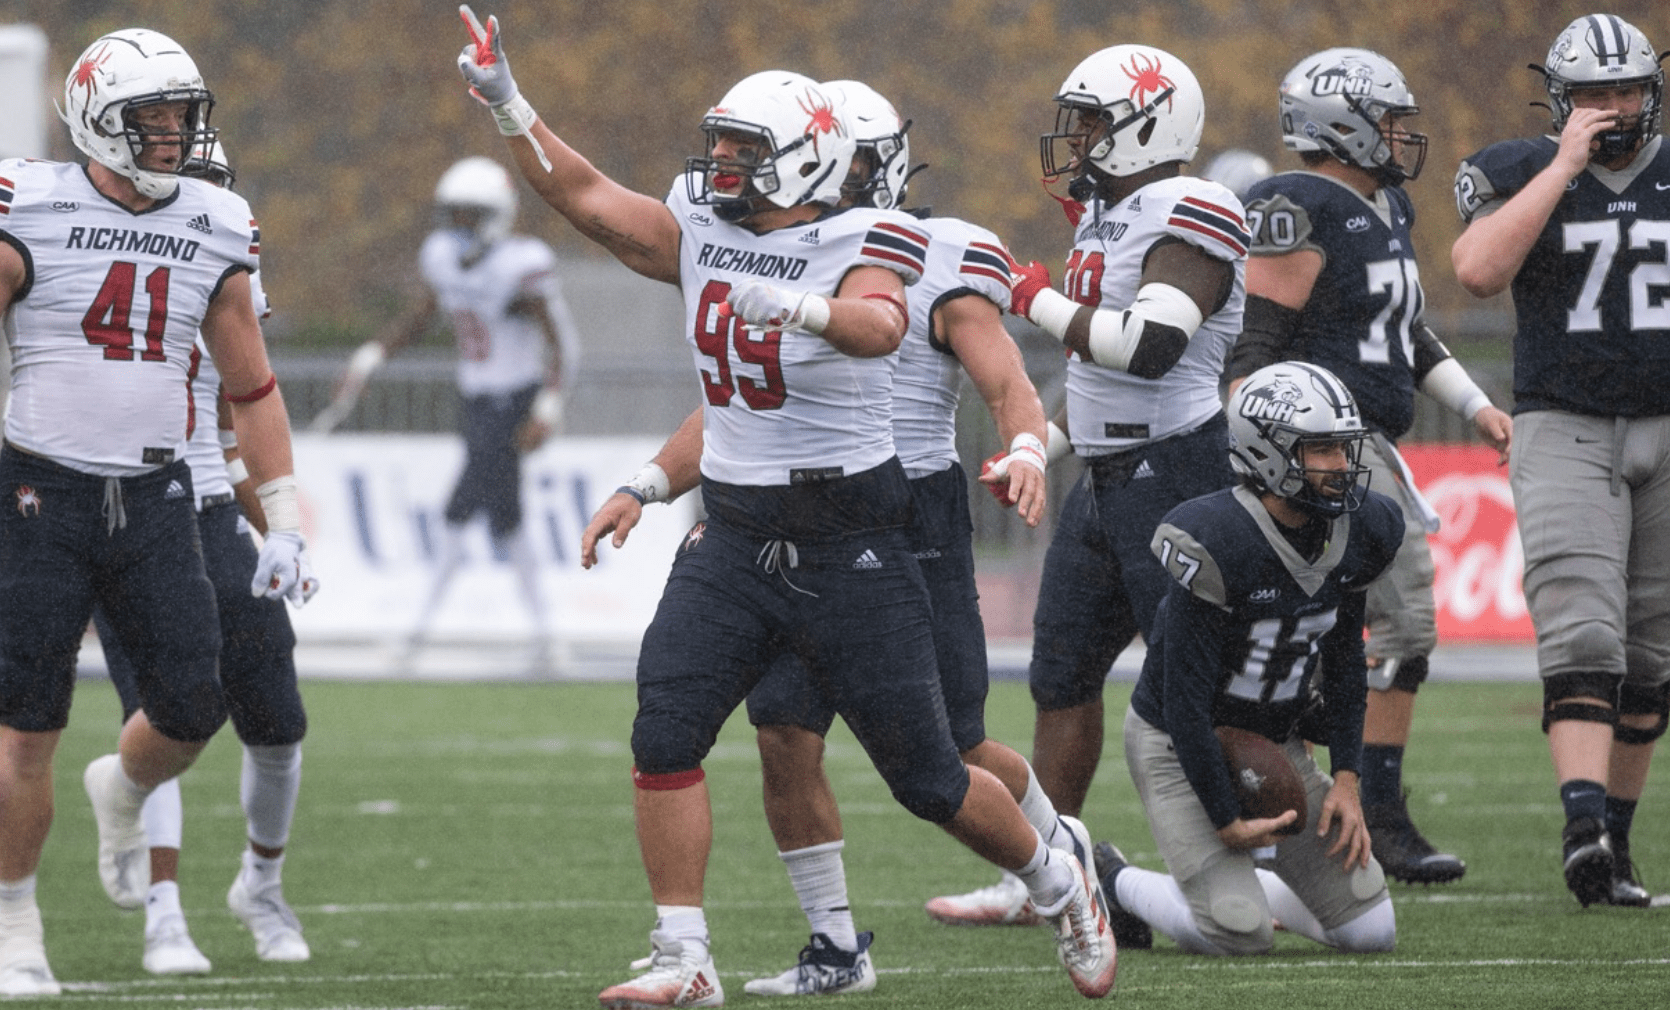 Aidan Murray the standout defensive lineman from the University of Richmond recently sat down with Draft Diamonds writer Justin Berendzen